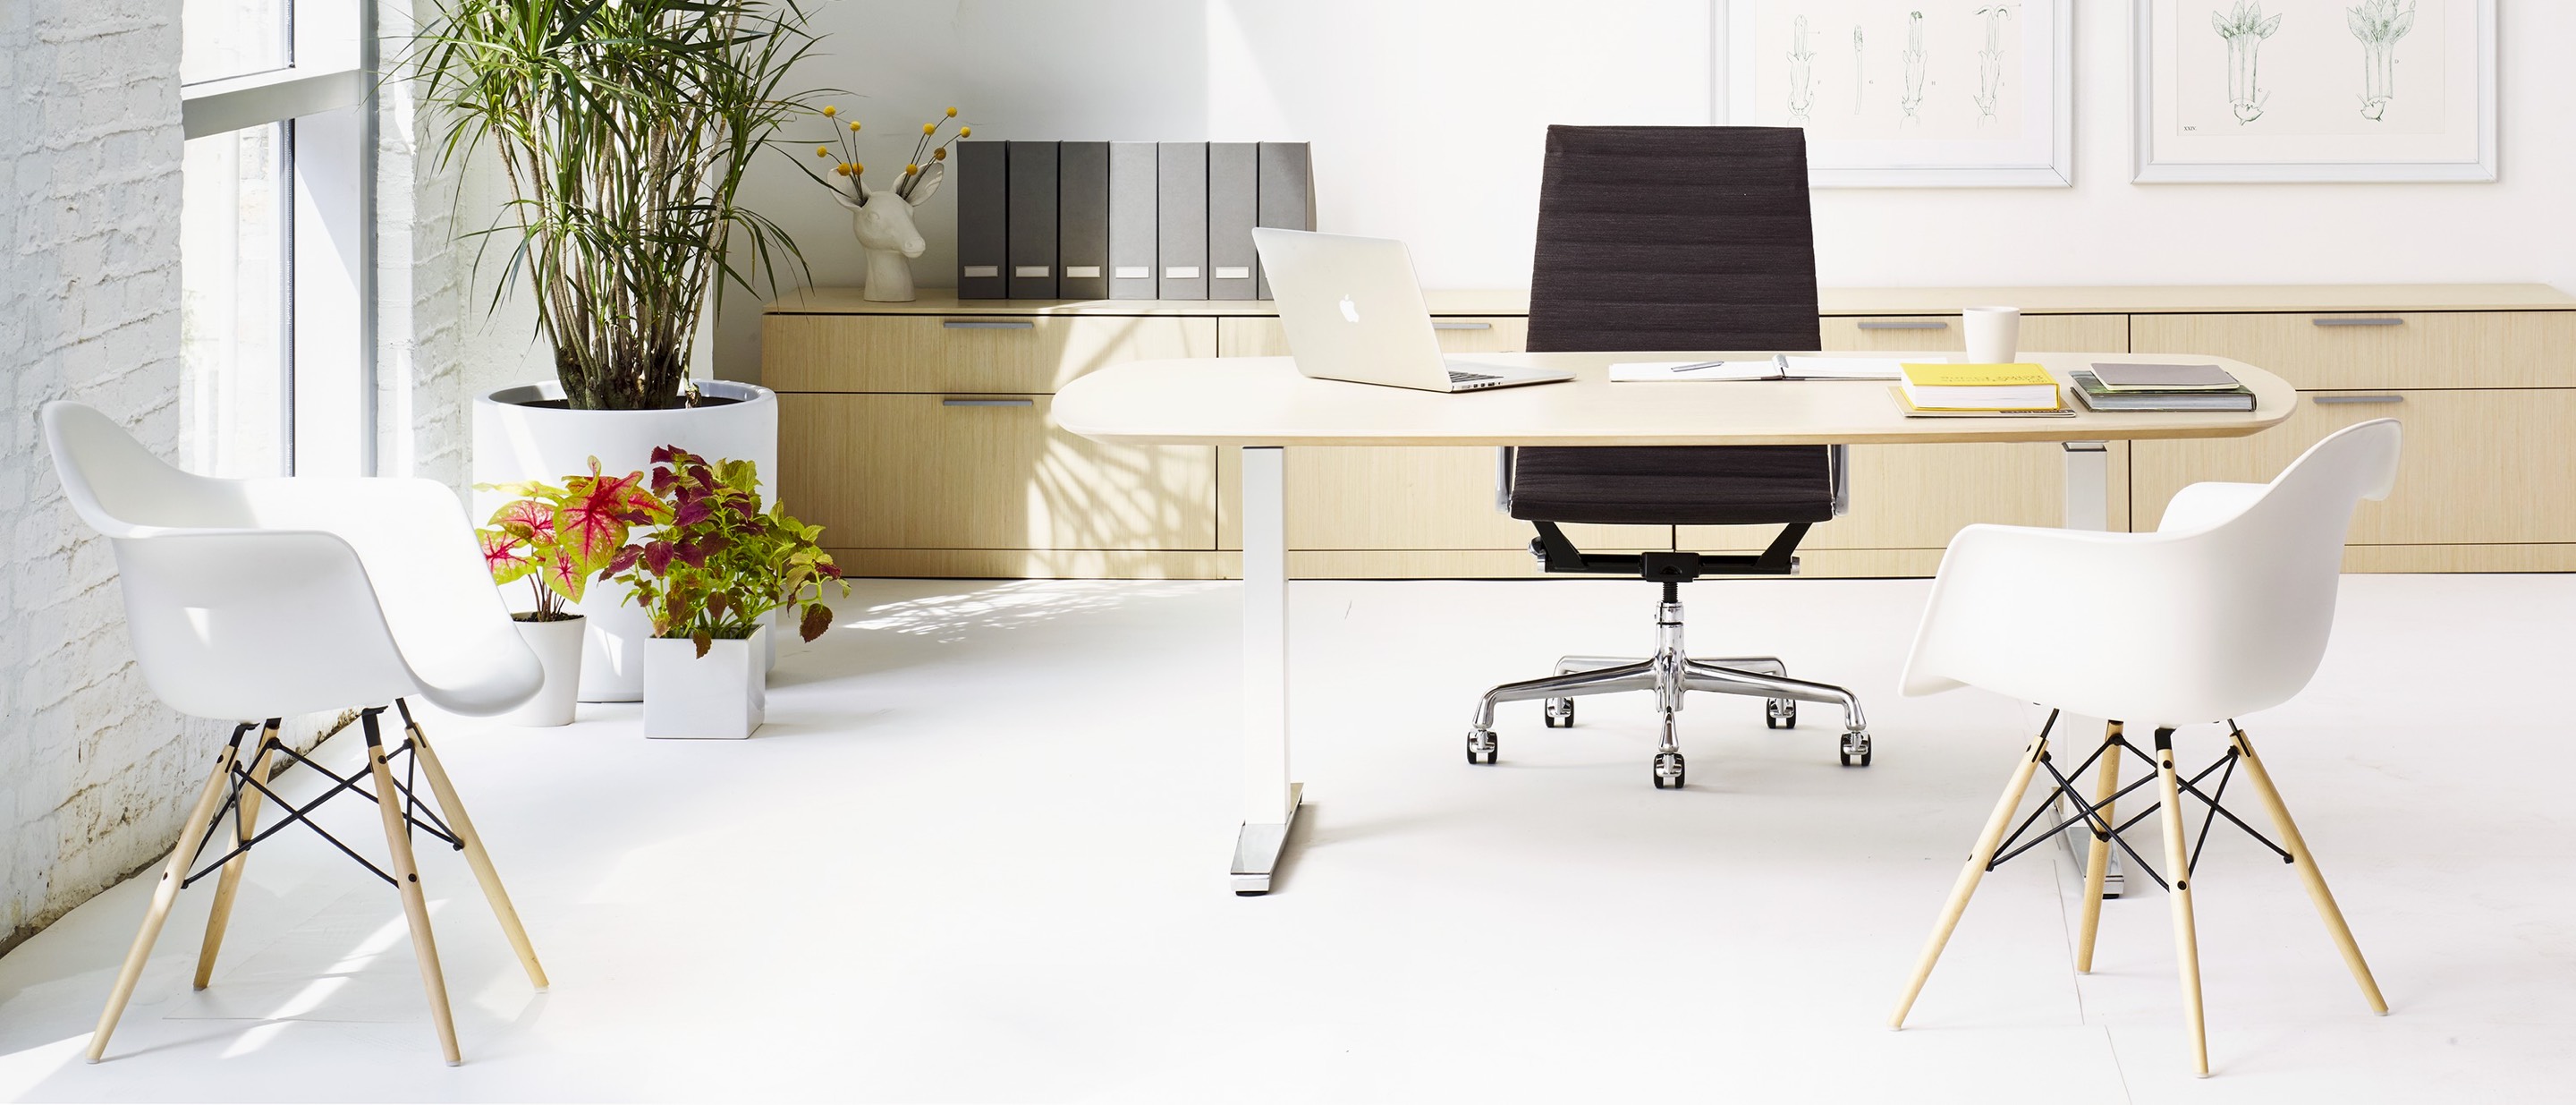 An office featuring an oval Renew Sit-to-Stand Table at a seated height, black Eames Aluminum Group Chair, and two Eames Molded Plastic Armchairs.